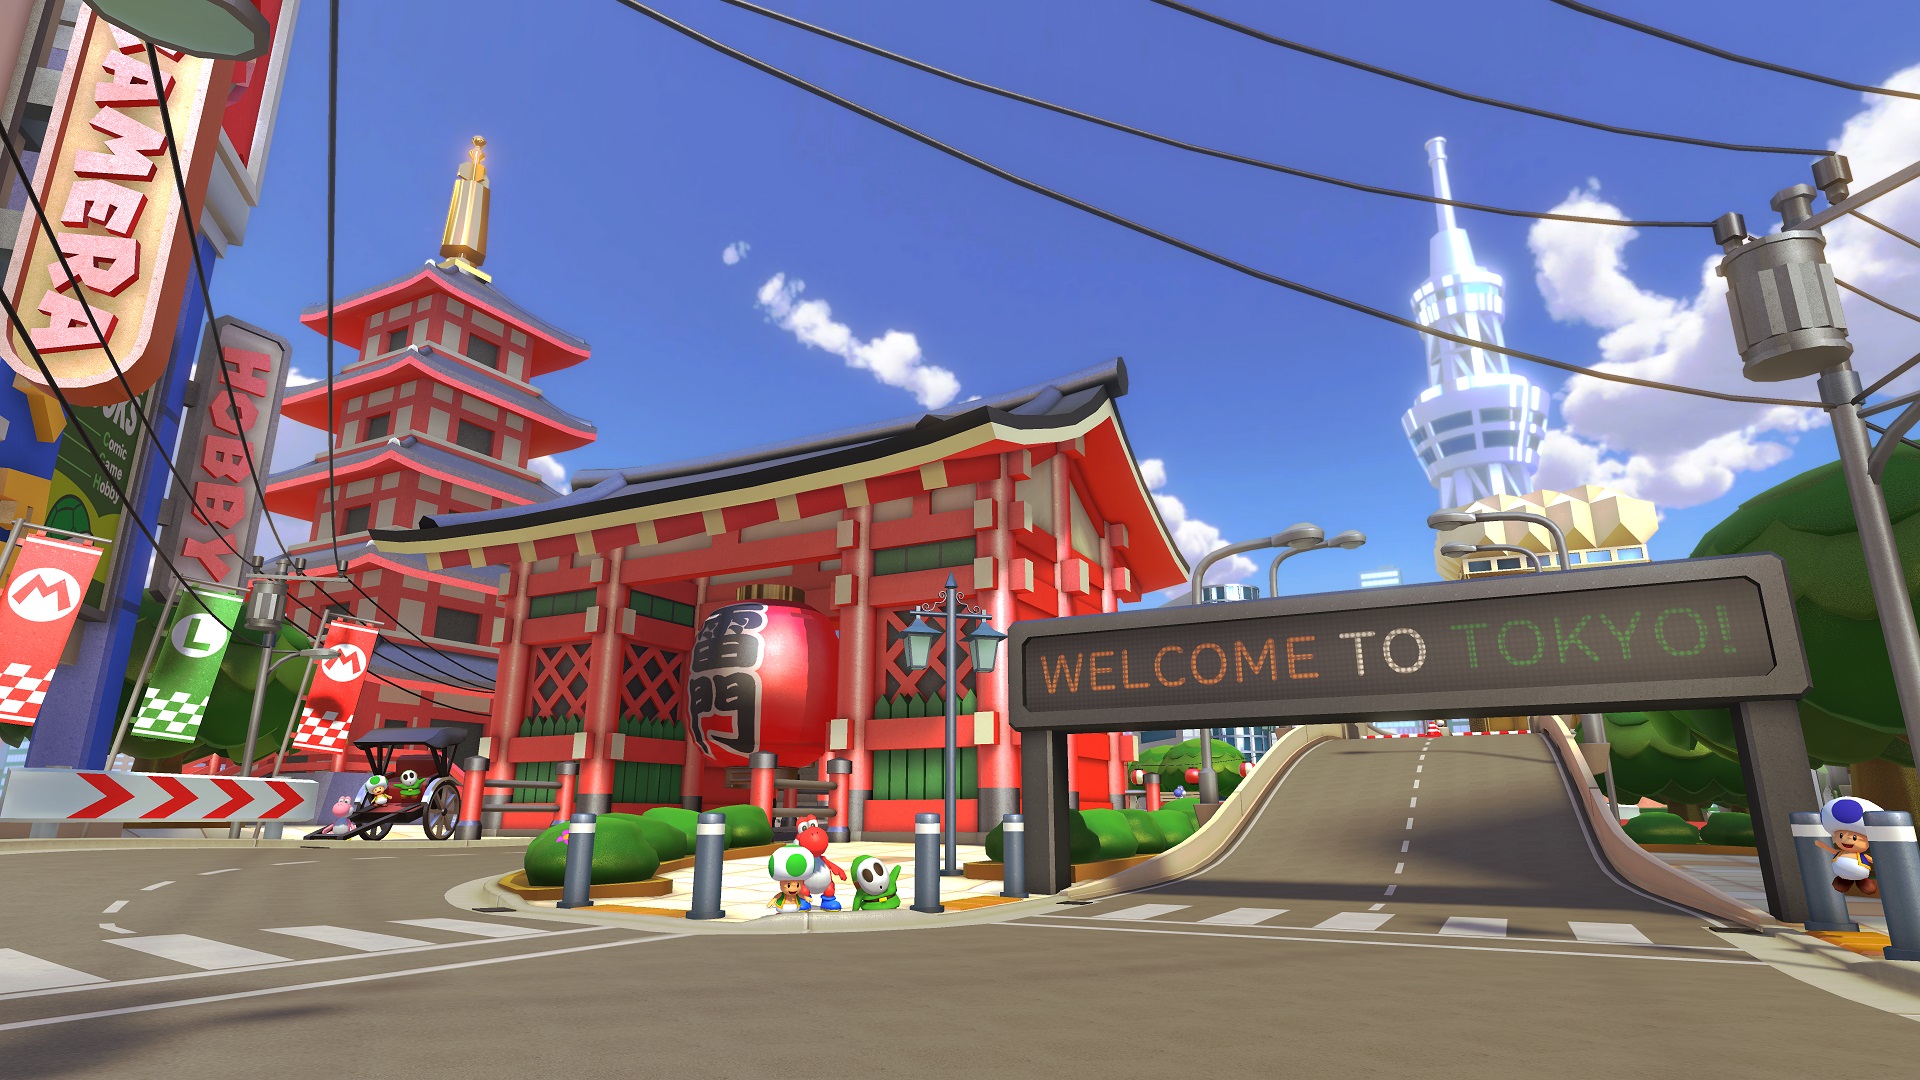 Mario Kart 8 Deluxe is adding 48 newly remastered classic courses as paid  DLC